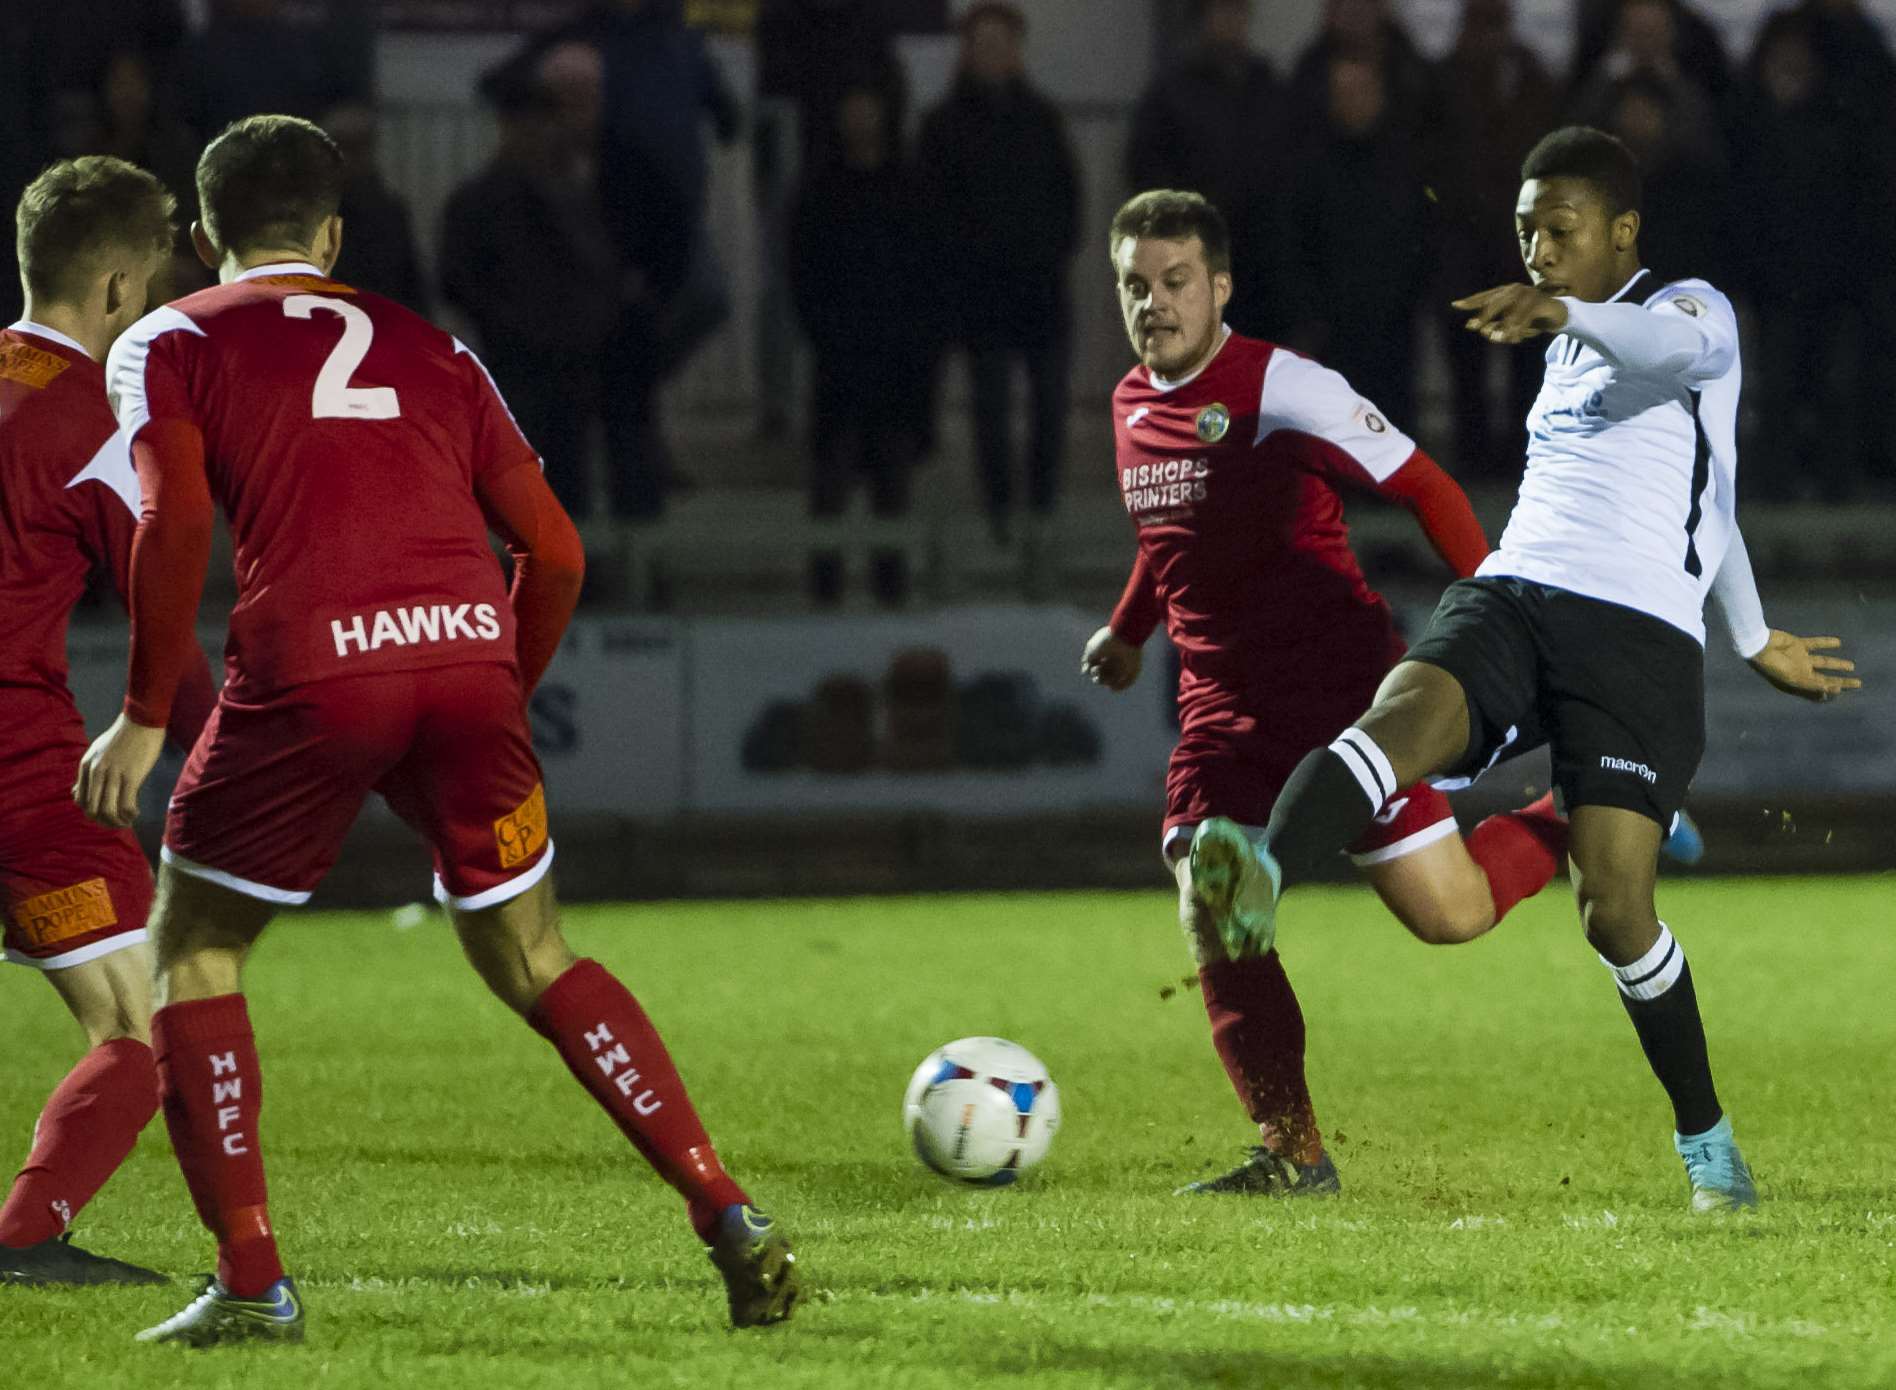 Ebou Adams scores his first senior goal for Dartford against Havant & Waterlooville Picture: Andy Payton